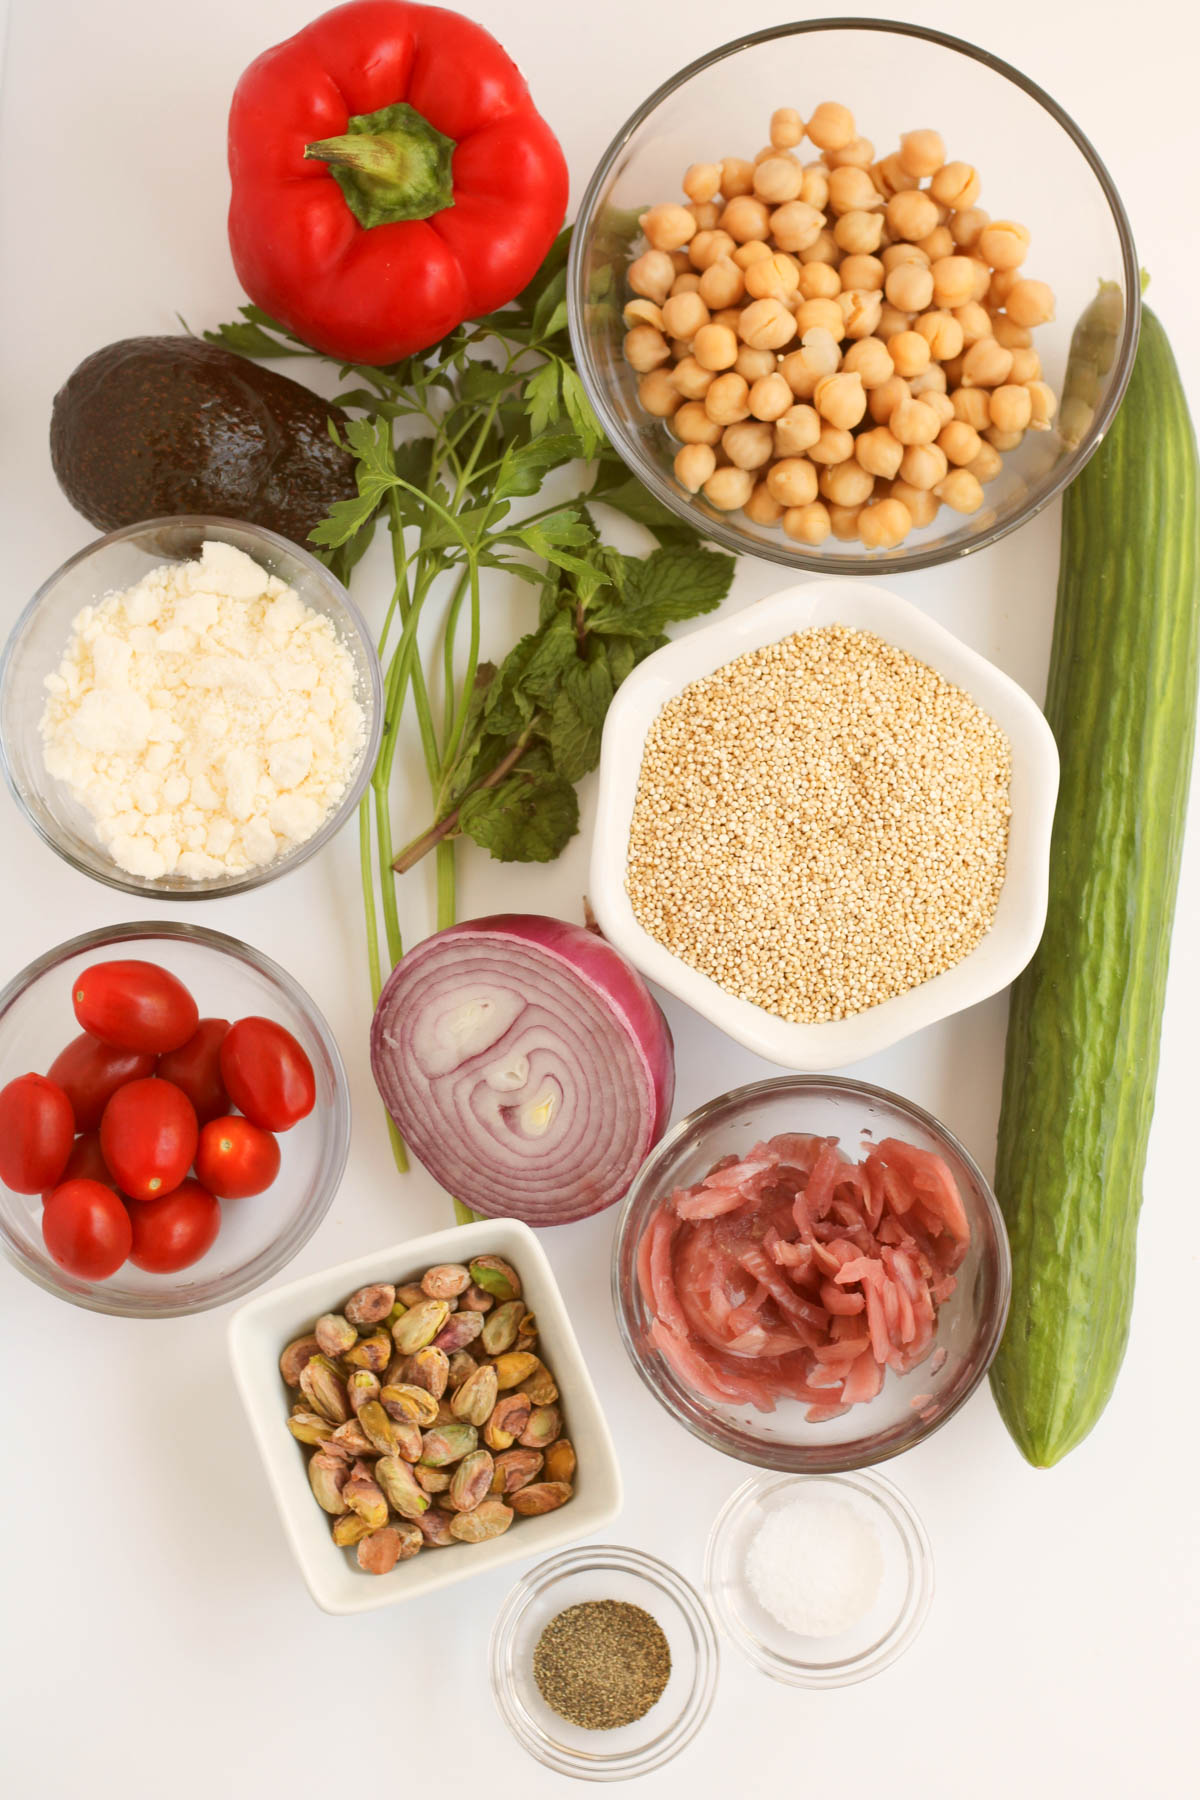 Vegetables, chickpeas and quinoa are displayed in individual bowls. 